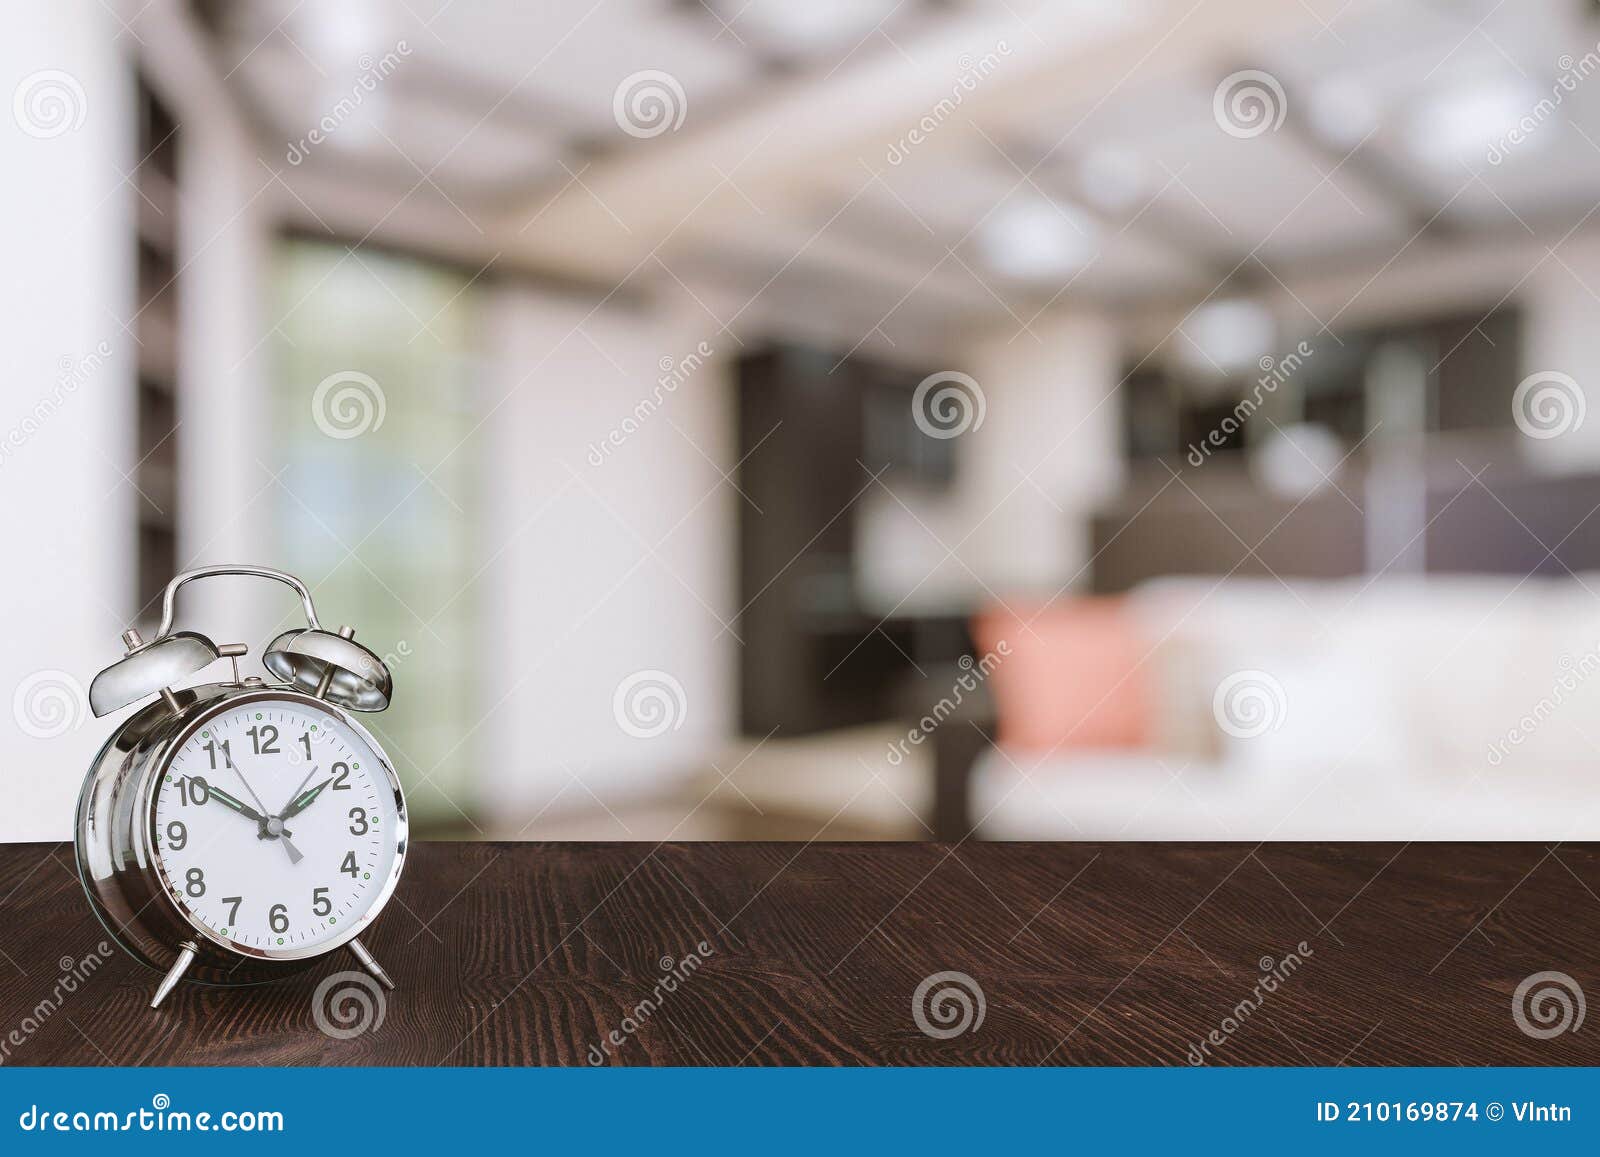 12am 12pm Clock On Wooden Table Stock Photo 611748464